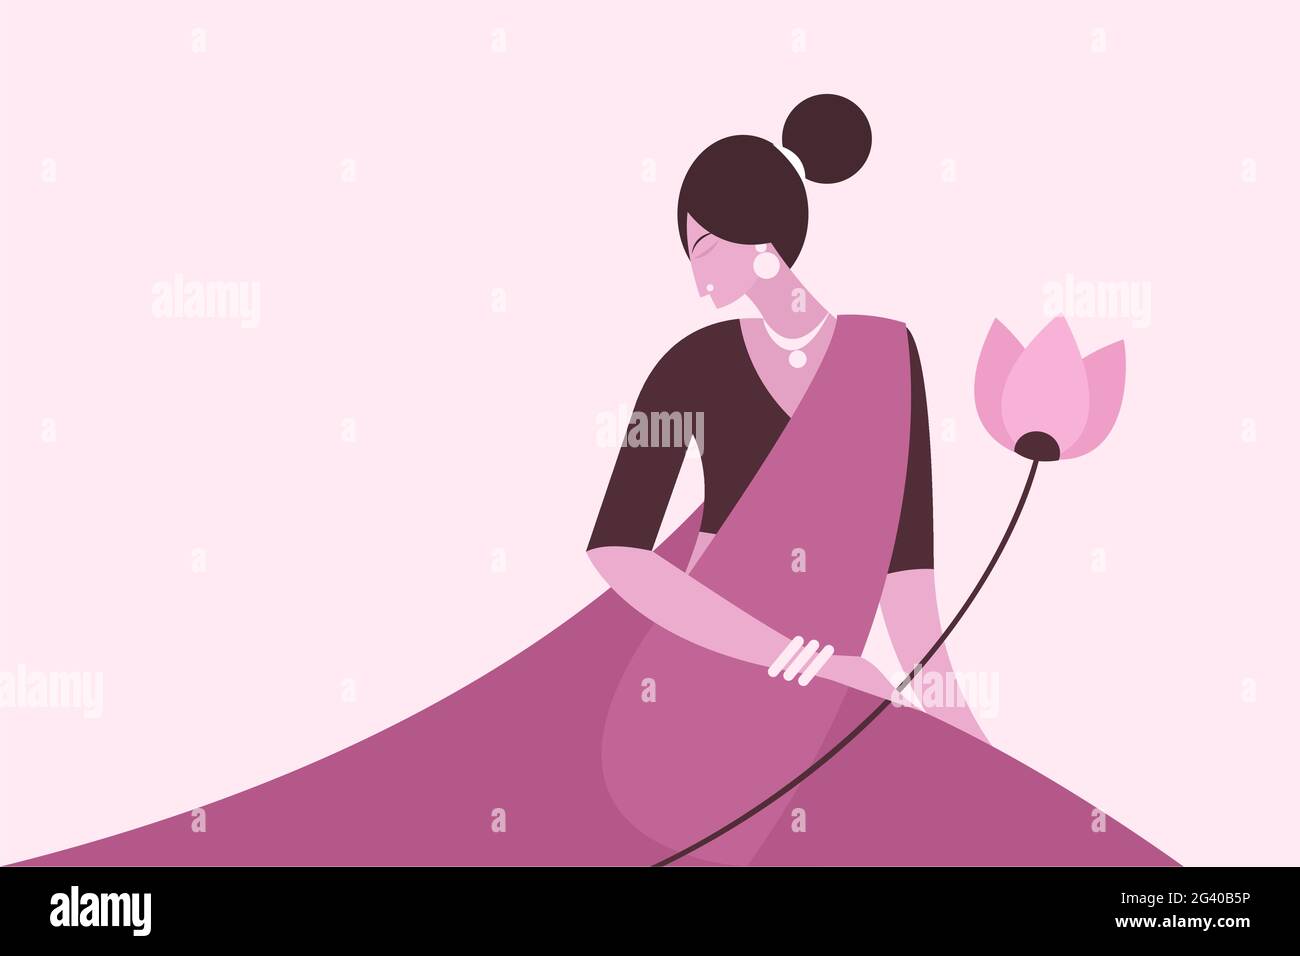 Illustration of a woman wearing traditional Indian dress holding lotus flowers Stock Vector